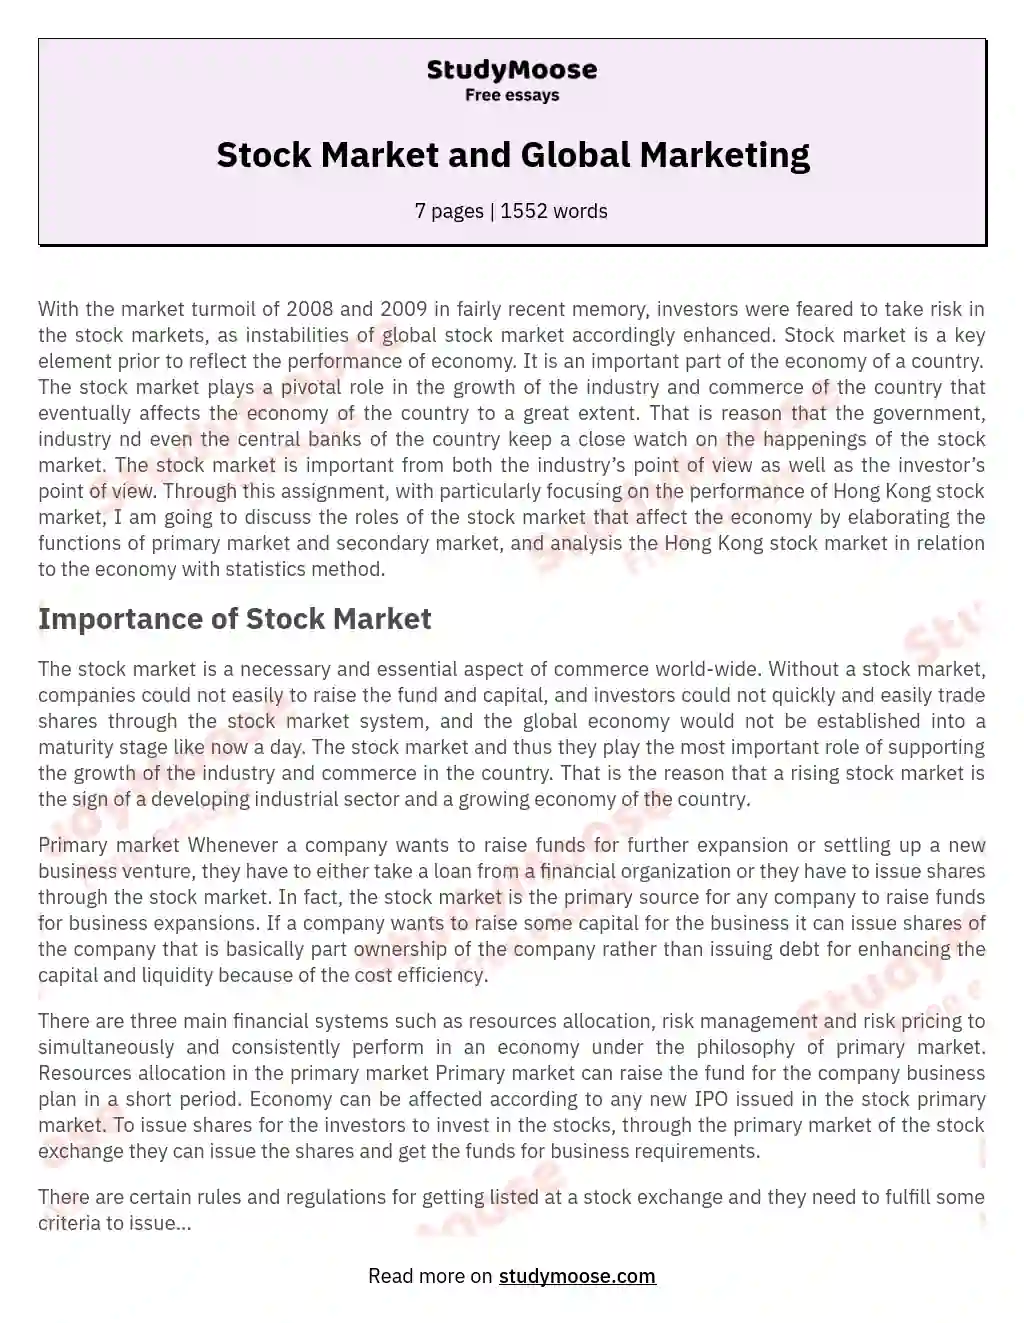 Stock Market and Global Marketing essay